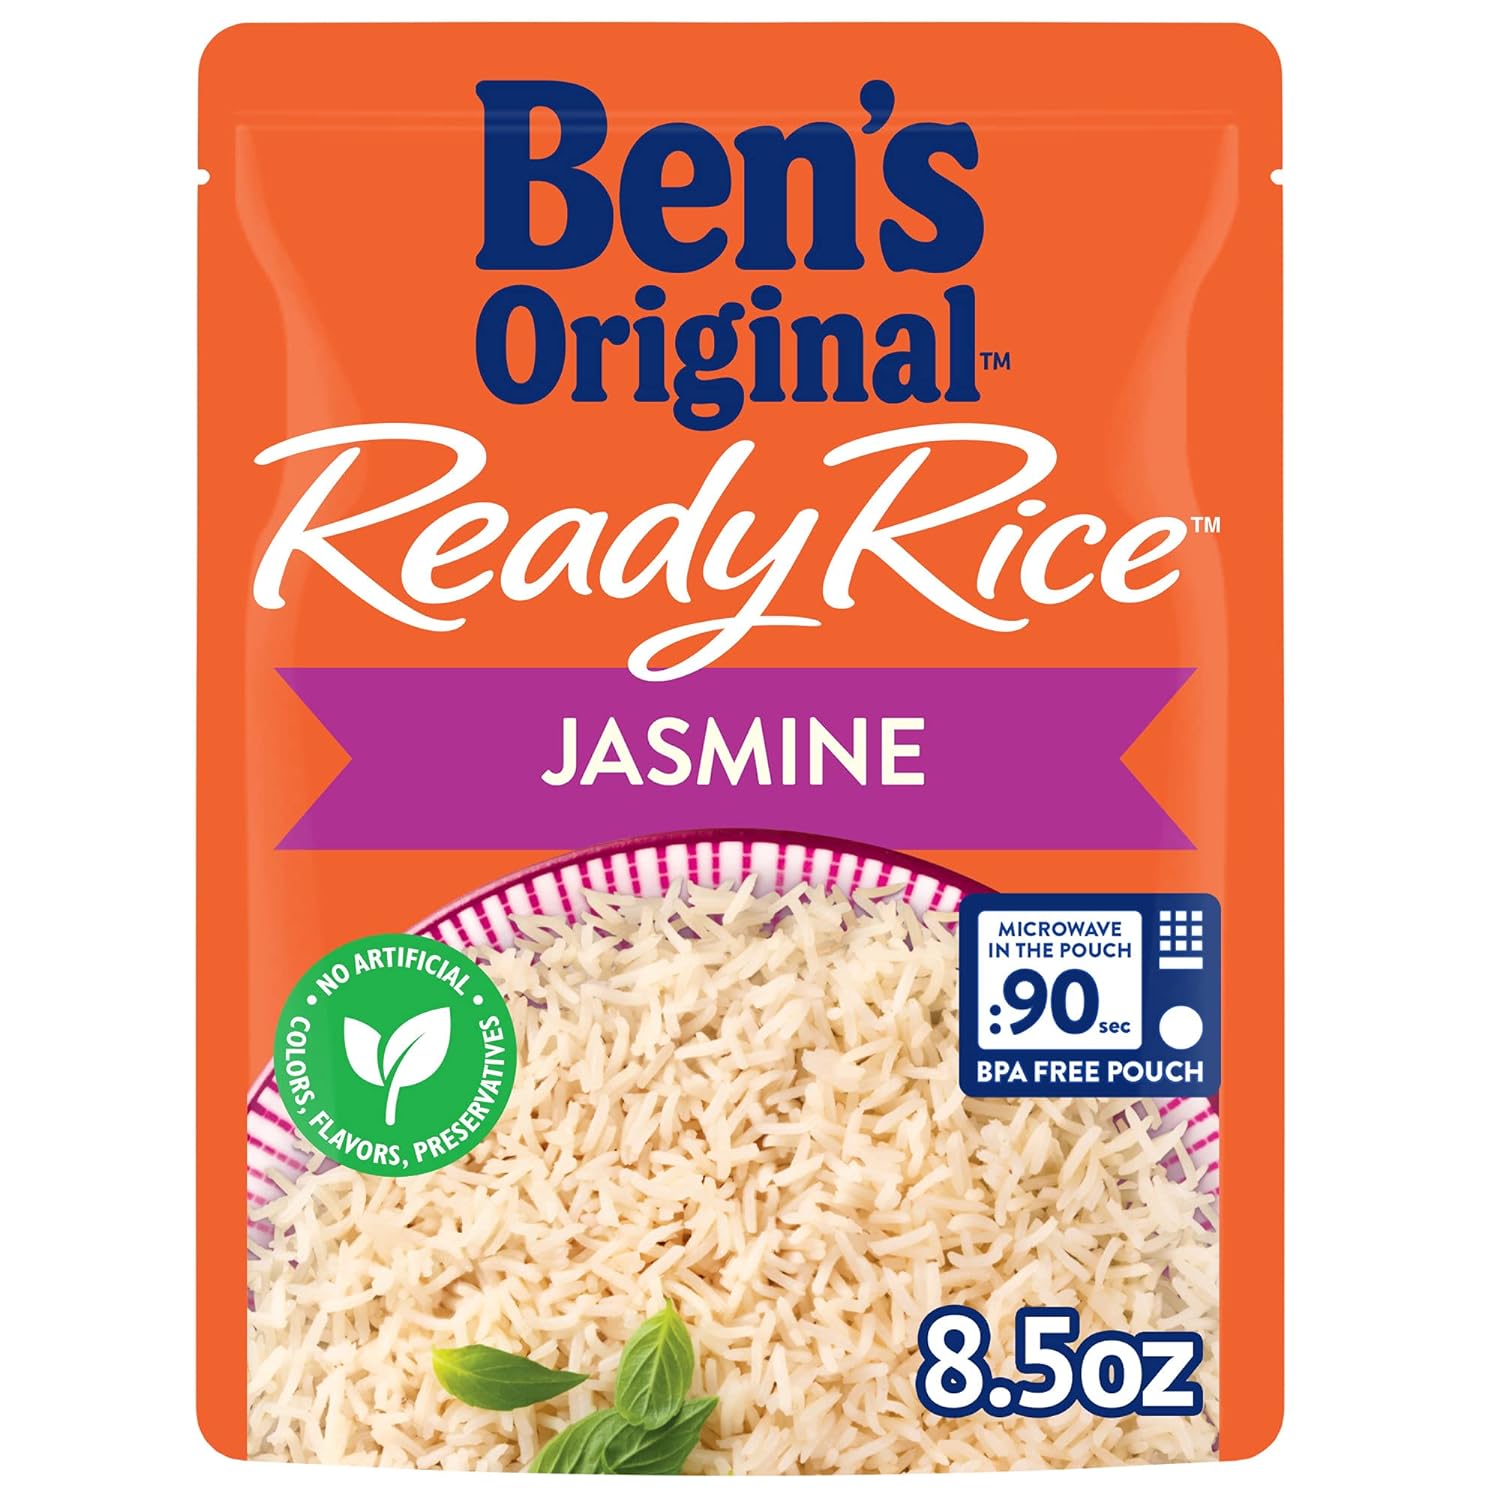 I recently discovered BEN'S ORIGINAL Ready Rice Jasmine Rice, and it has become a staple in my pantry! This pack of 6 pouches is incredibly convenient for quick and easy dinners.Firstly, the aroma of jasmine rice fills the kitchen as soon as you open the pouch - it's truly enticing. The rice itself cooks perfectly in just 90 seconds in the microwave, which is perfect for busy weeknights when I need a speedy side dish.The texture of the rice is spot on - fluffy and tender with a slight stickiness that makes it perfect for pairing with stir-fries, curries, or even just enjoying plain. Each pouch is the ideal portion size, making it easy to avoid waste.I appreciate that this rice is preservative-free and made with simple ingredients, ensuring both convenience and quality. Plus, the pack of 6 offers great value for money.Overall, BEN'S ORIGINAL Ready Rice Jasmine Rice has earned its place in my kitchen for its convenience, delicious flavor, and consistently perfect results. Highly recommend!